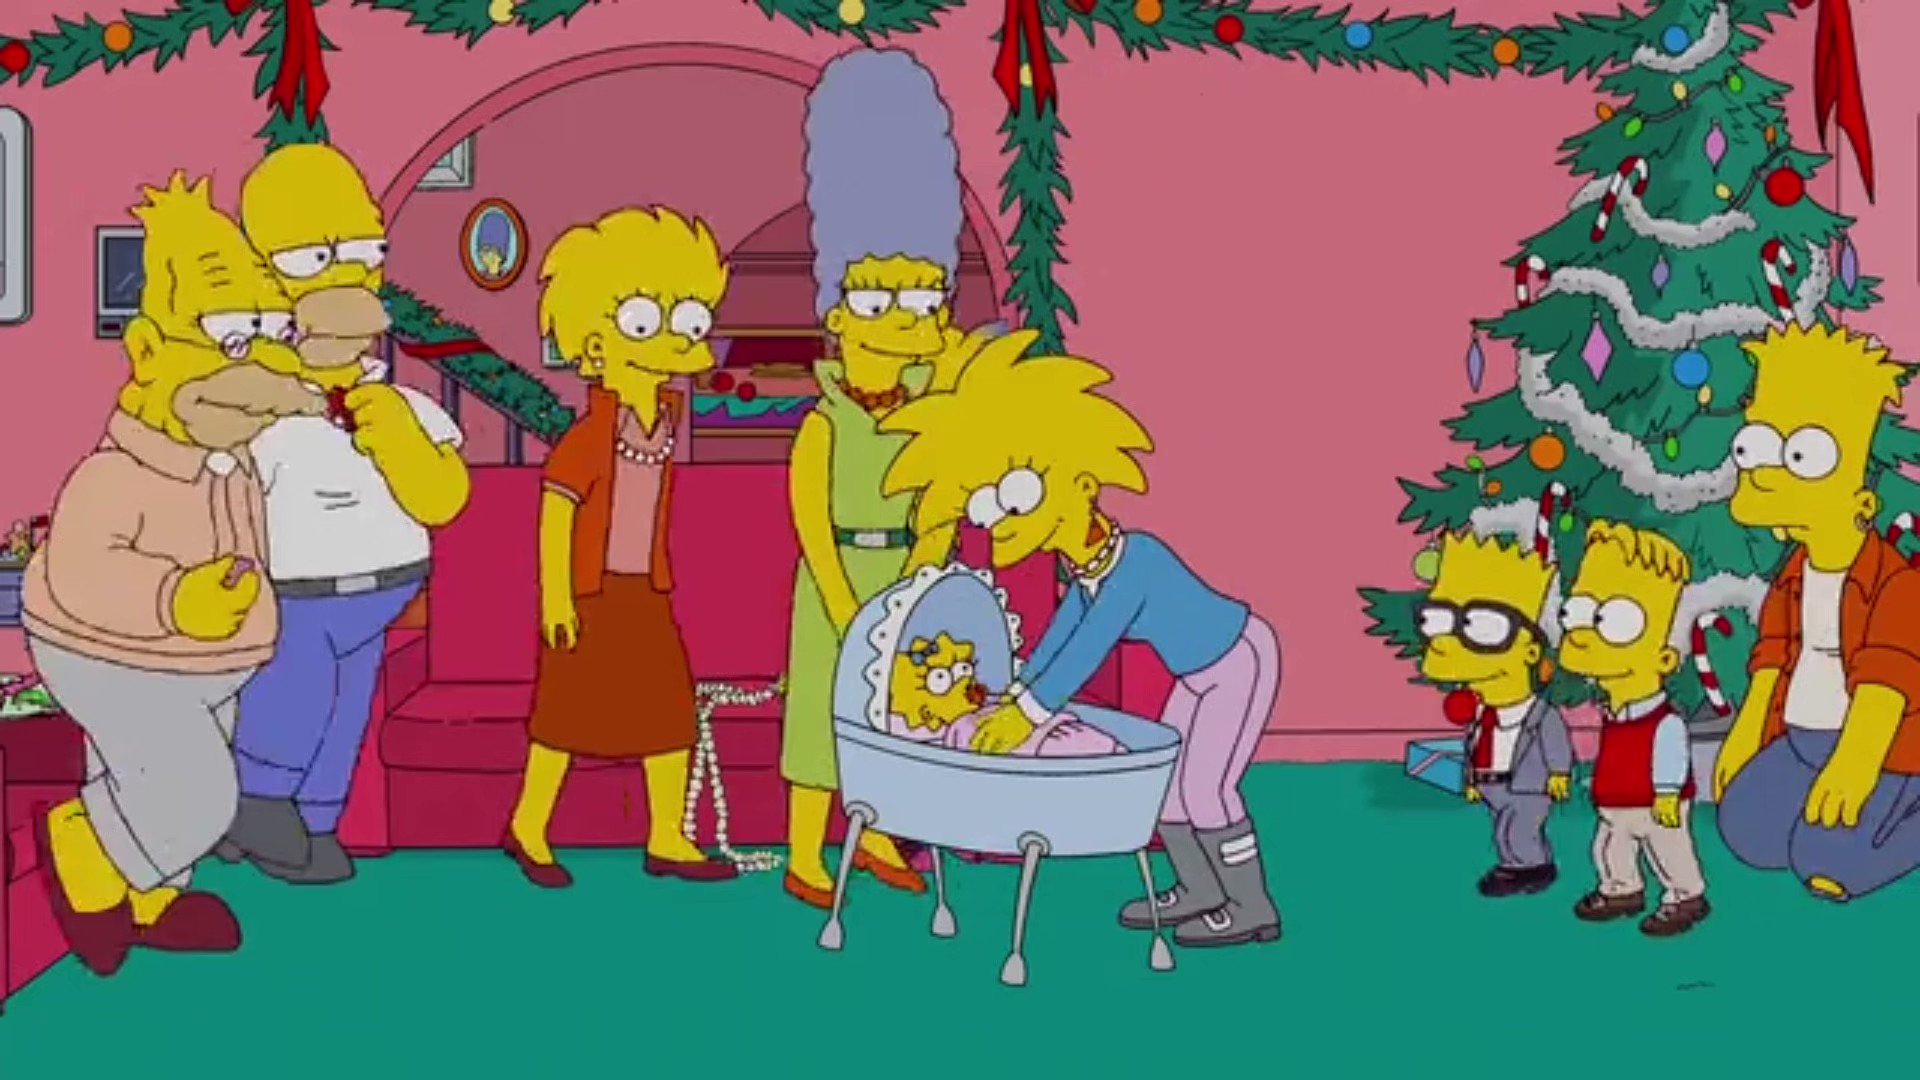 The Simpsons on X: "11. Season 23, Ep 9: Holidays of Future Passed (2011) https://t.co/WSoQd4agAD" / X